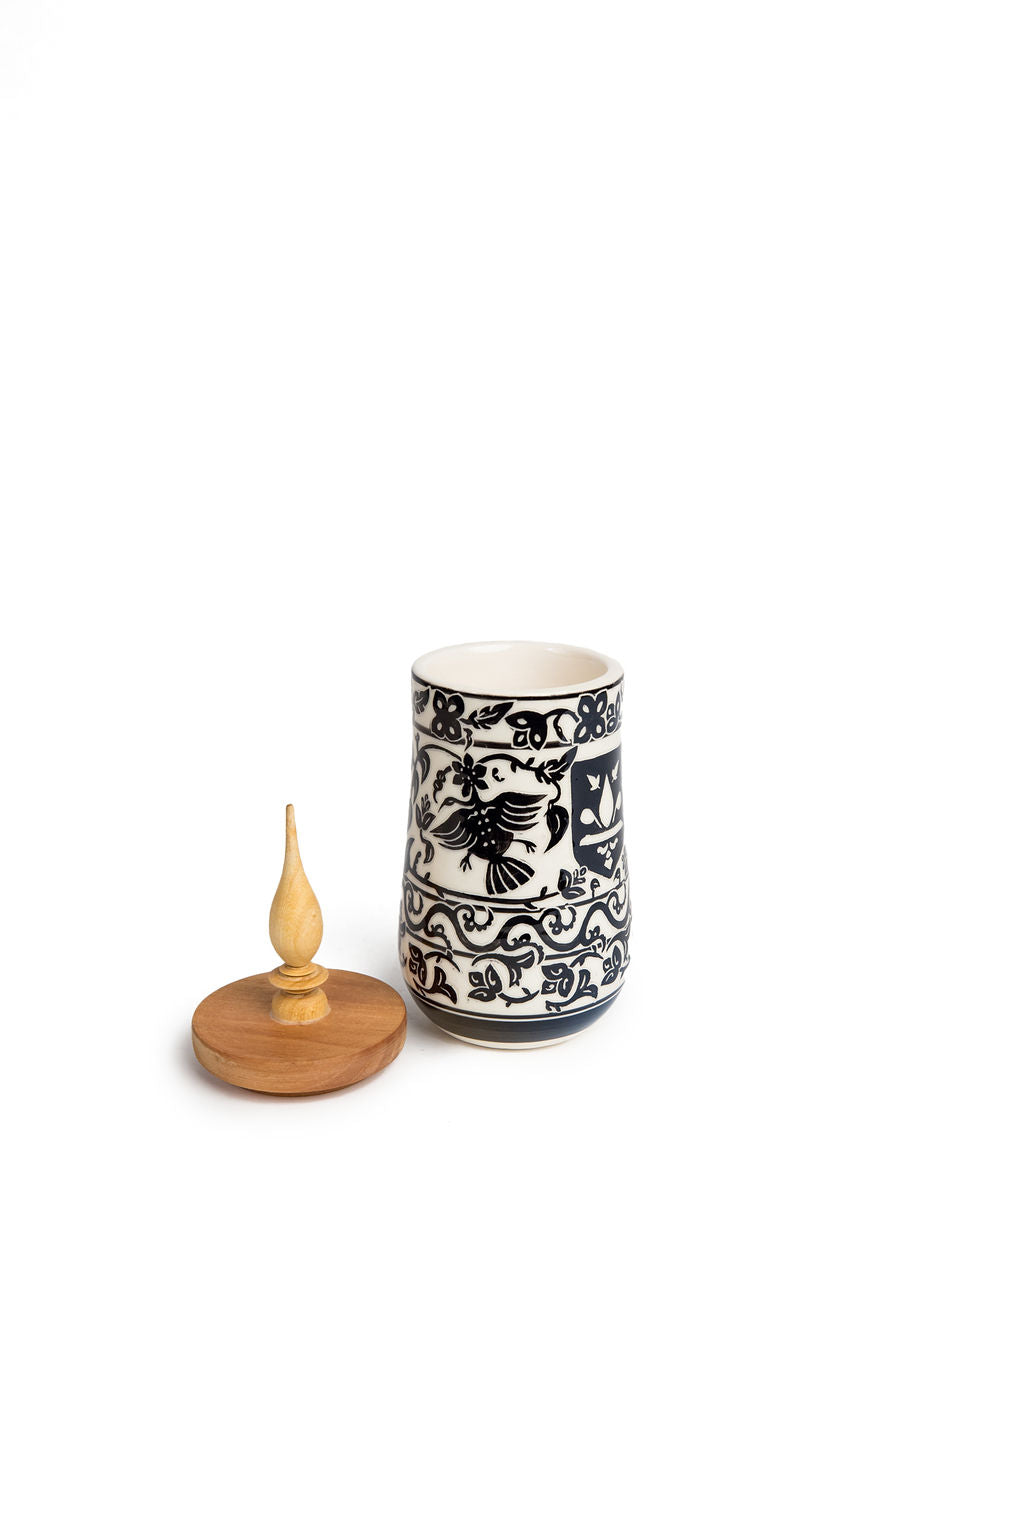 Moroccan handmade black and white ceramic canister.